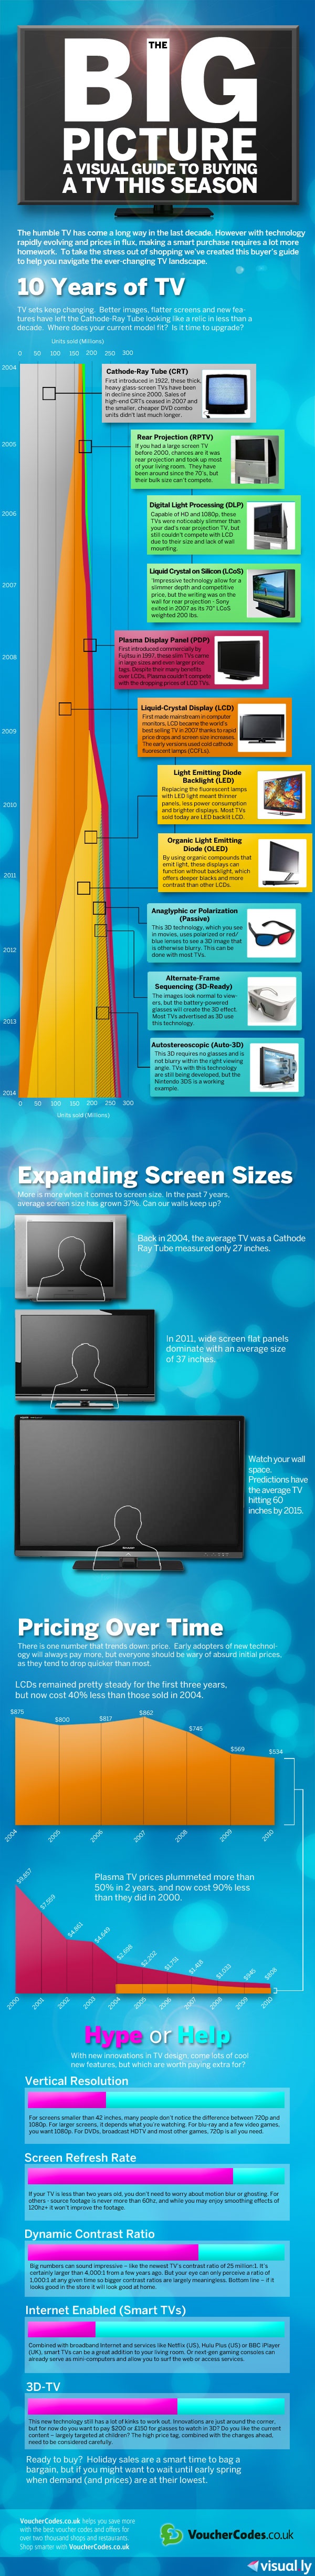 TV Trends How Television has changed over the past 10 years infographic